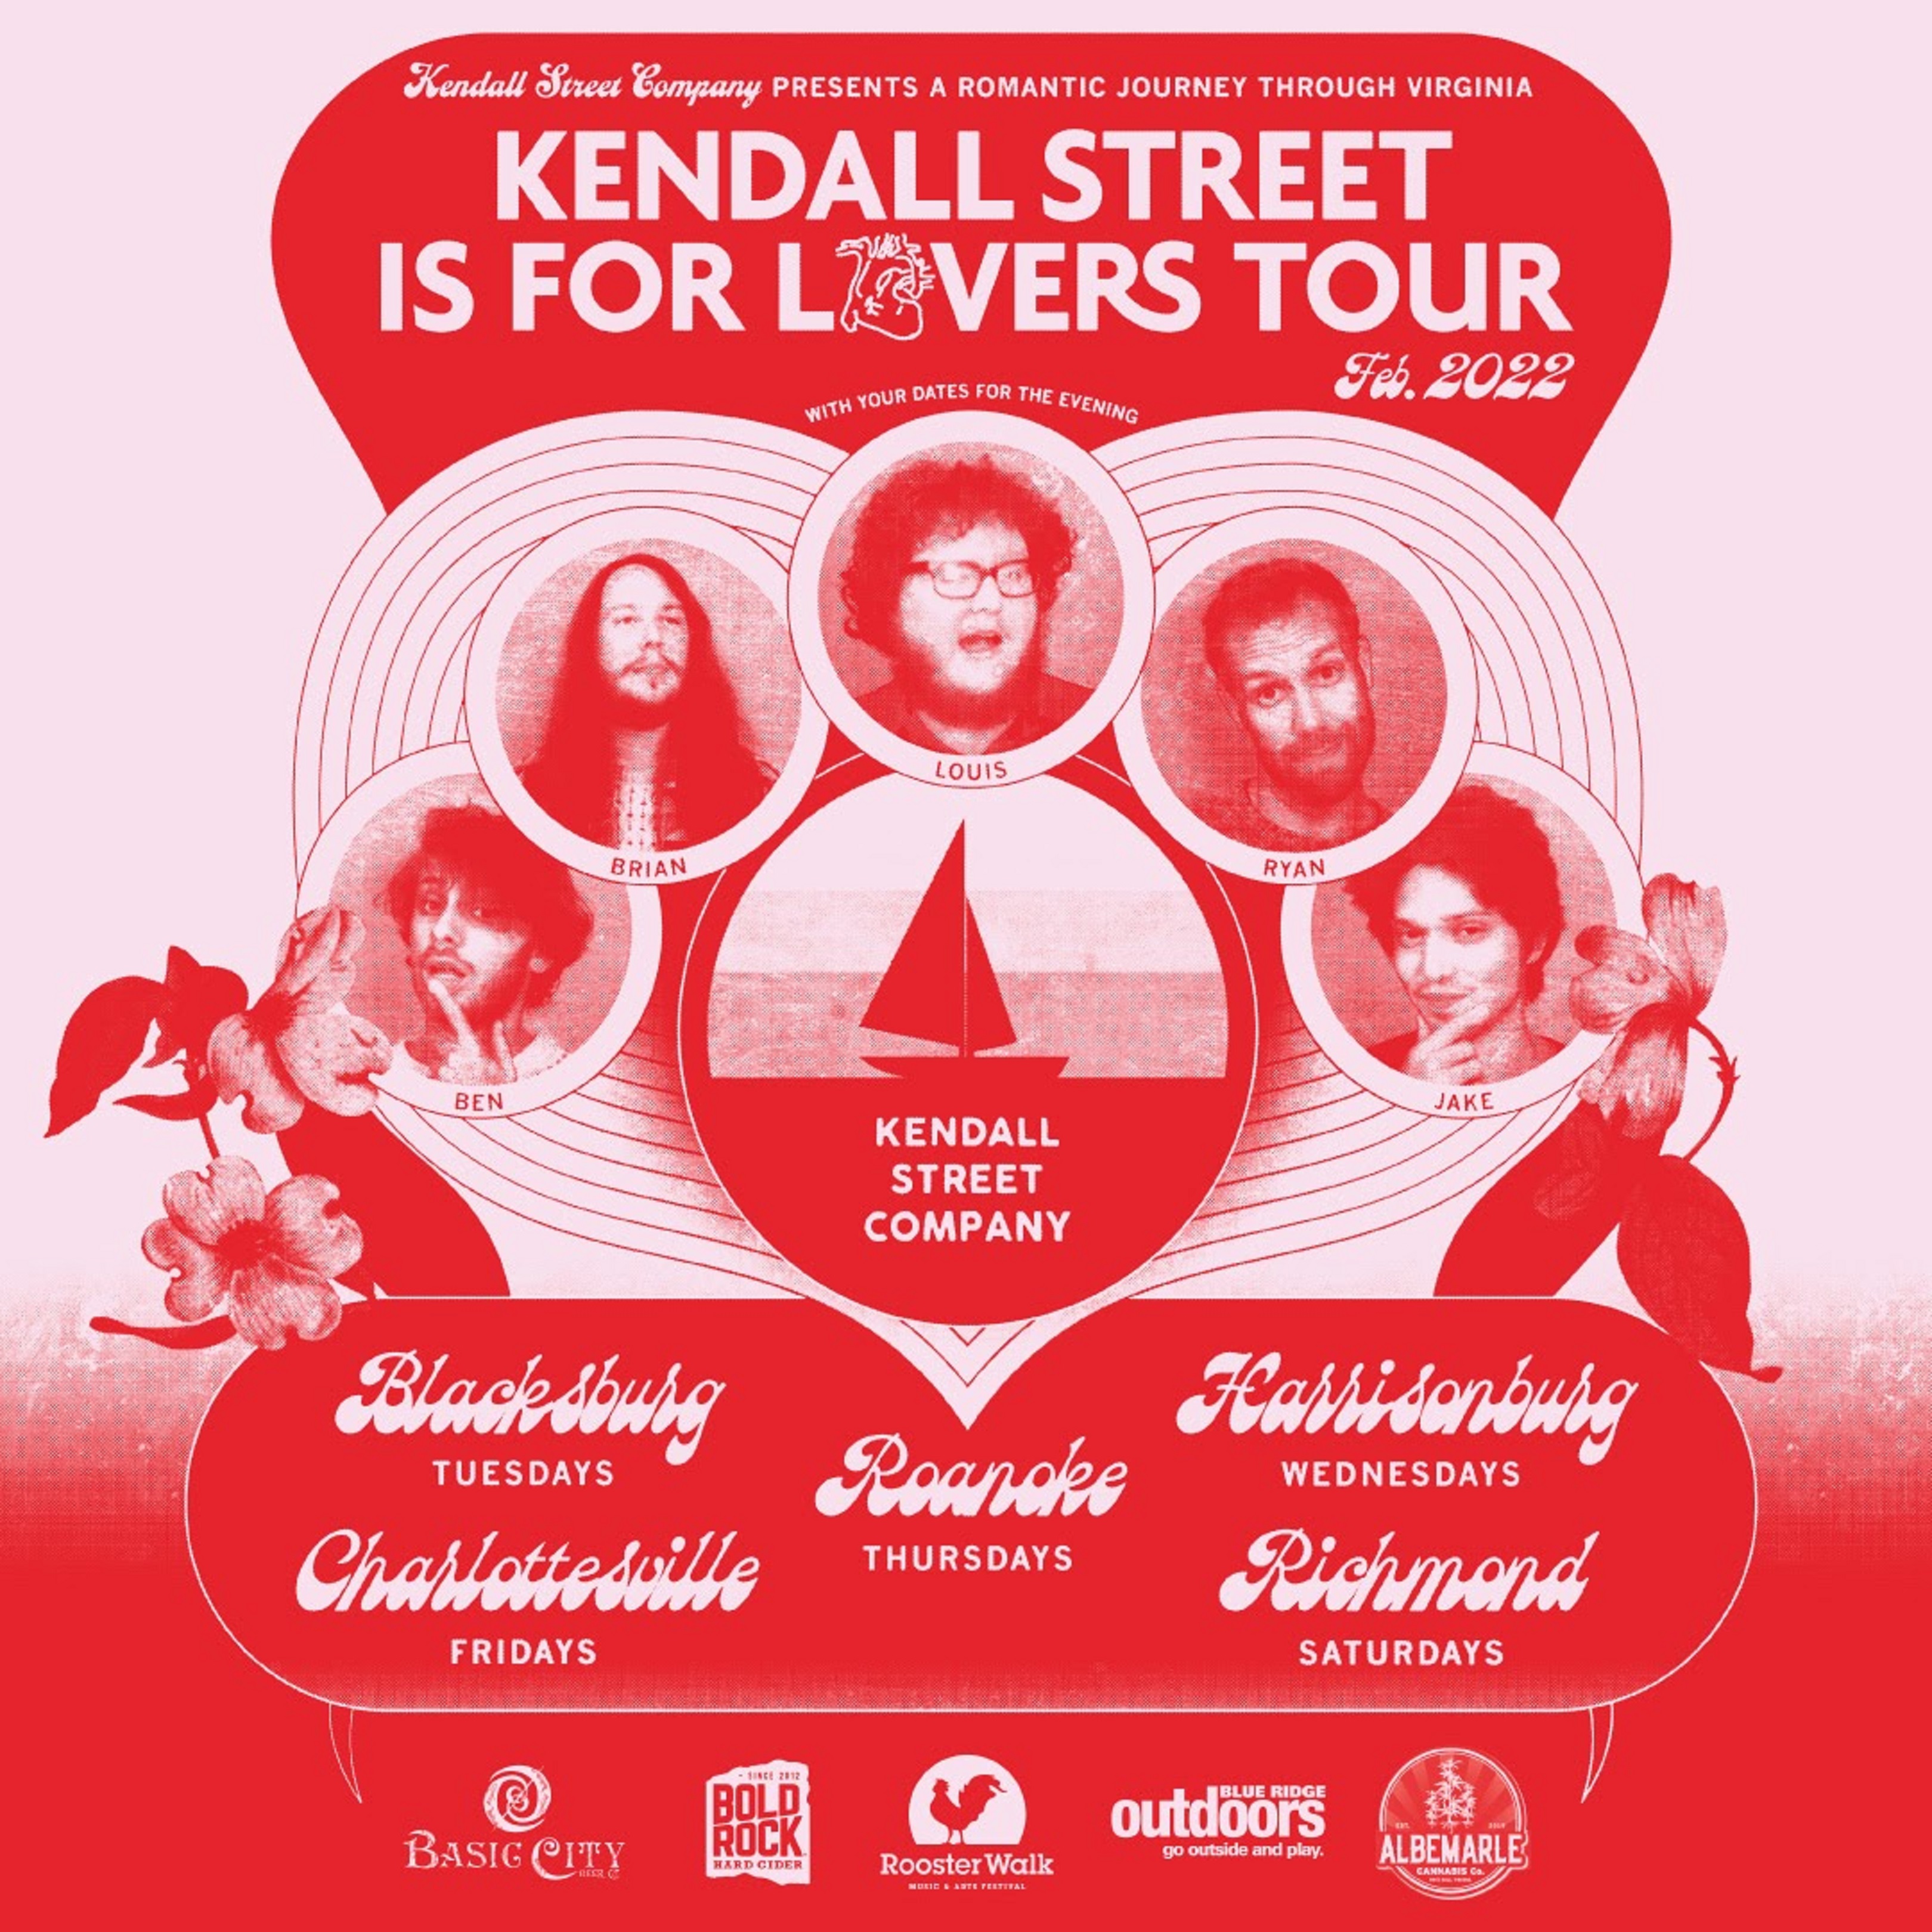 Kendall Street Company Announces February "Kendall Street Is For Lovers Tour"